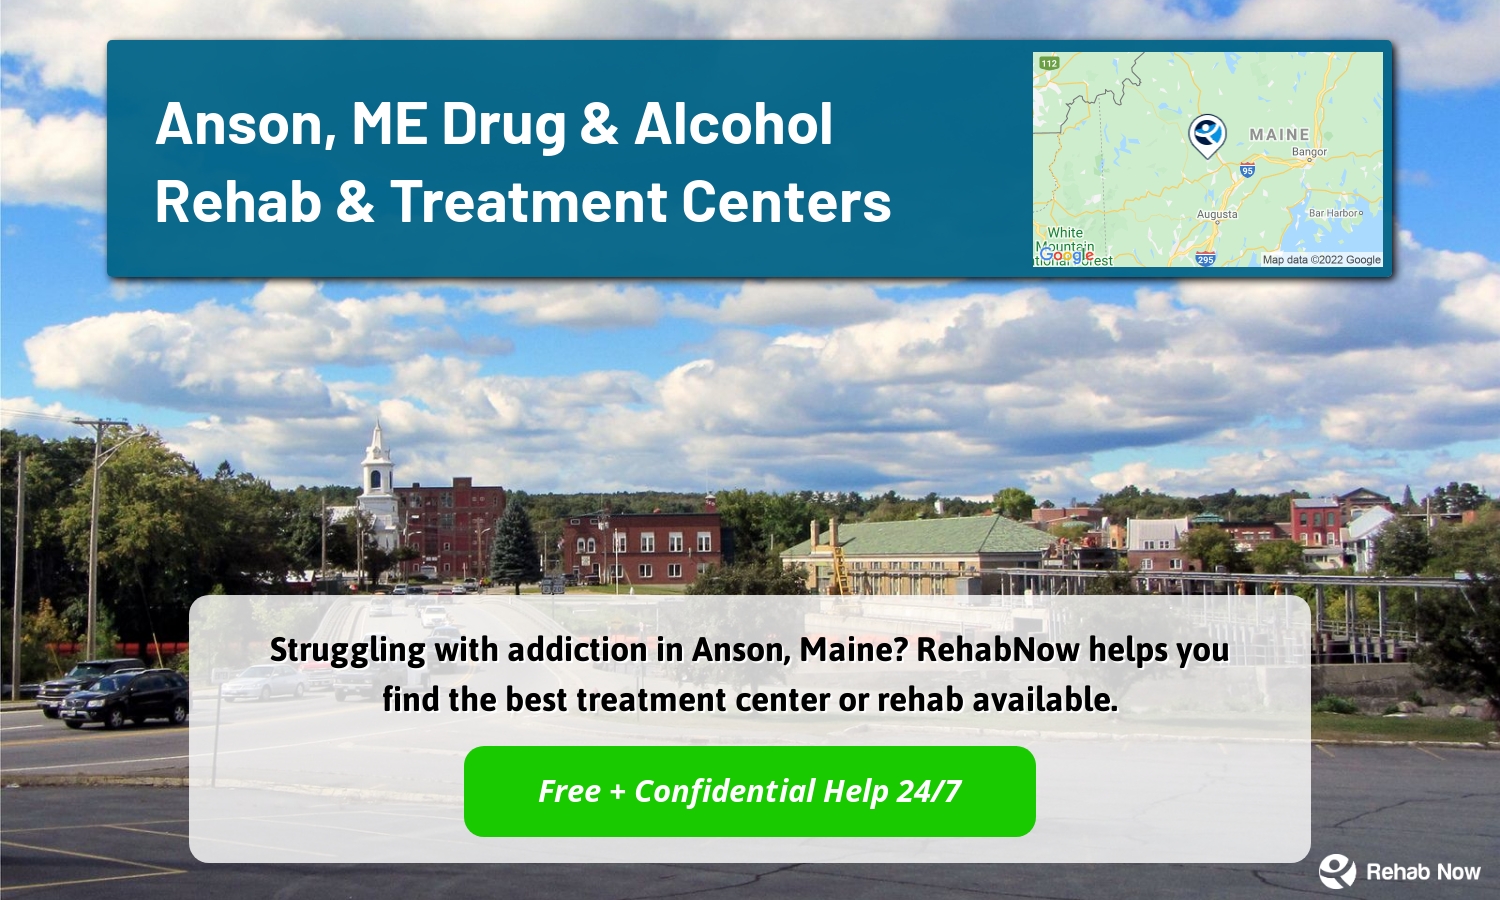 Struggling with addiction in Anson, Maine? RehabNow helps you find the best treatment center or rehab available.